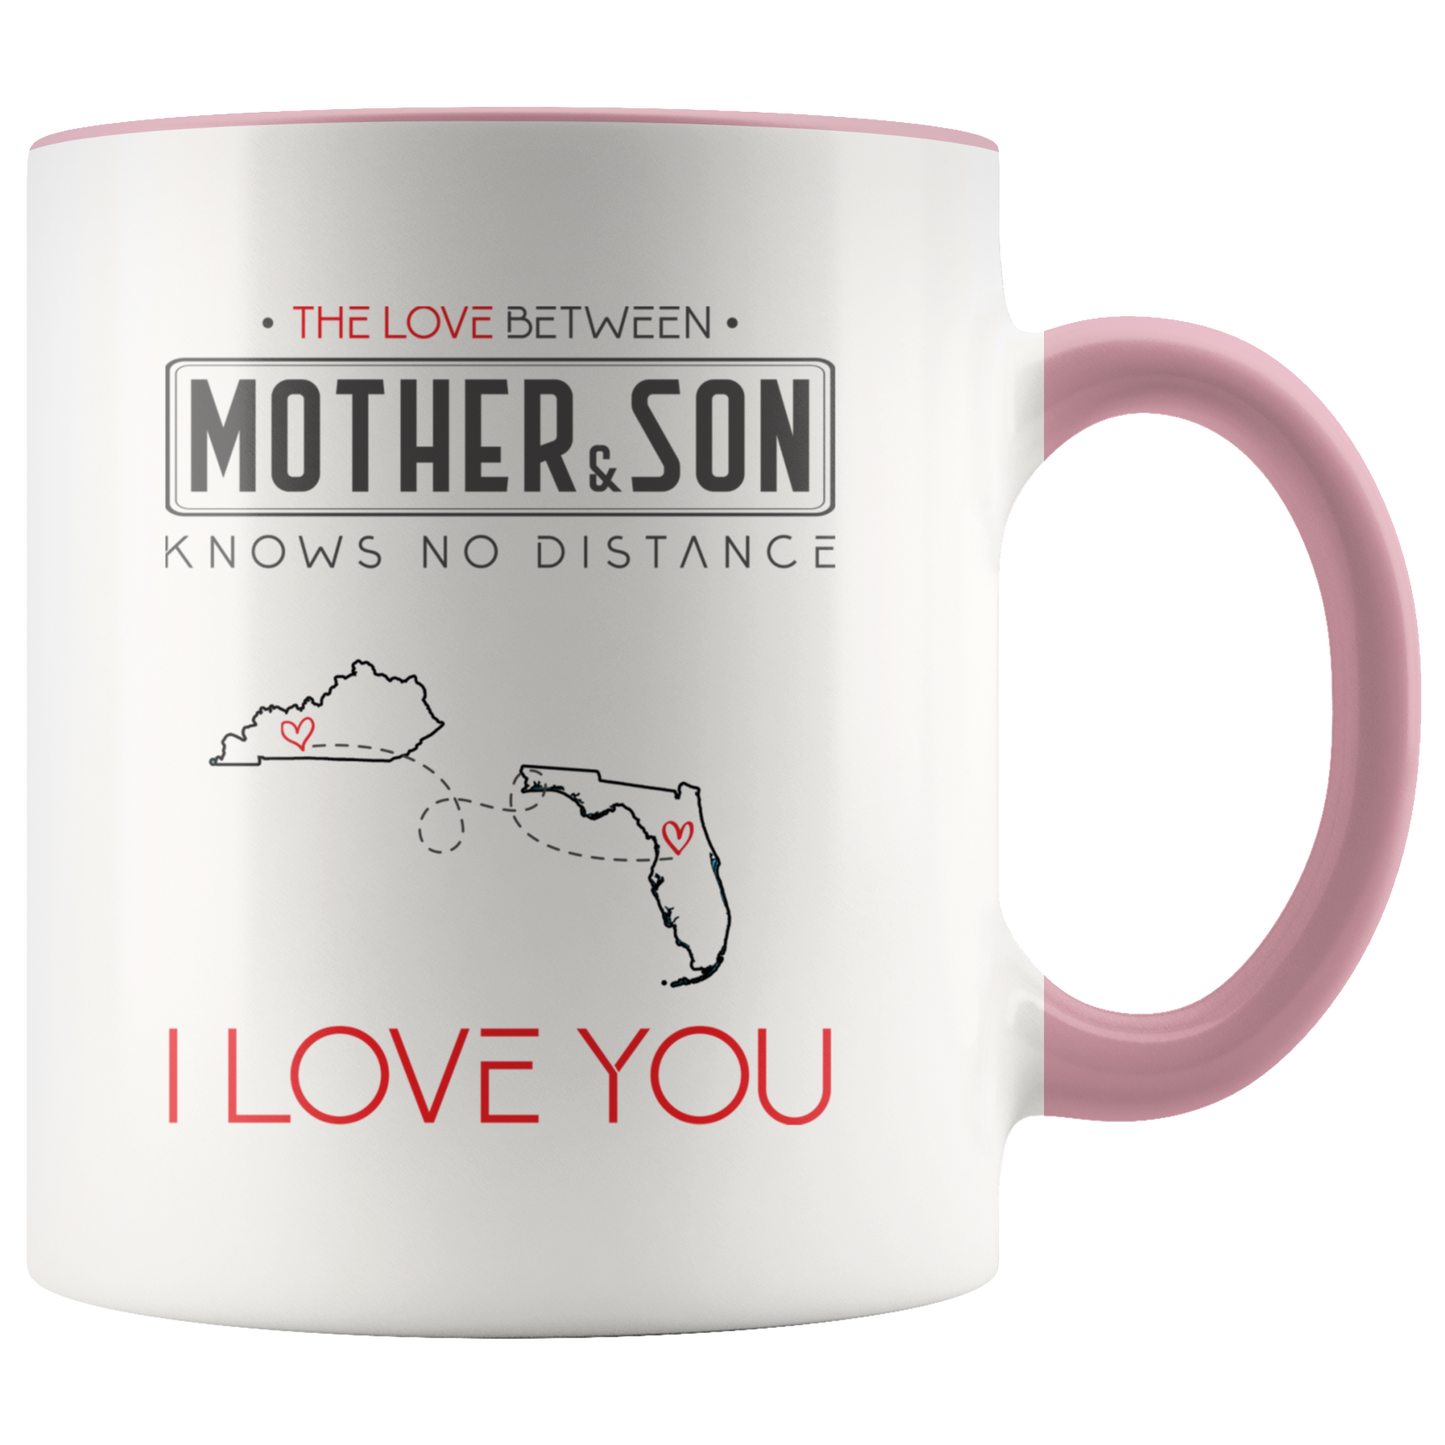 cust_80801_8141-sp-23570 - [ Kentucky | Florida ]Mother And Son Mug 11 oz - The Love Between Mother And Son K